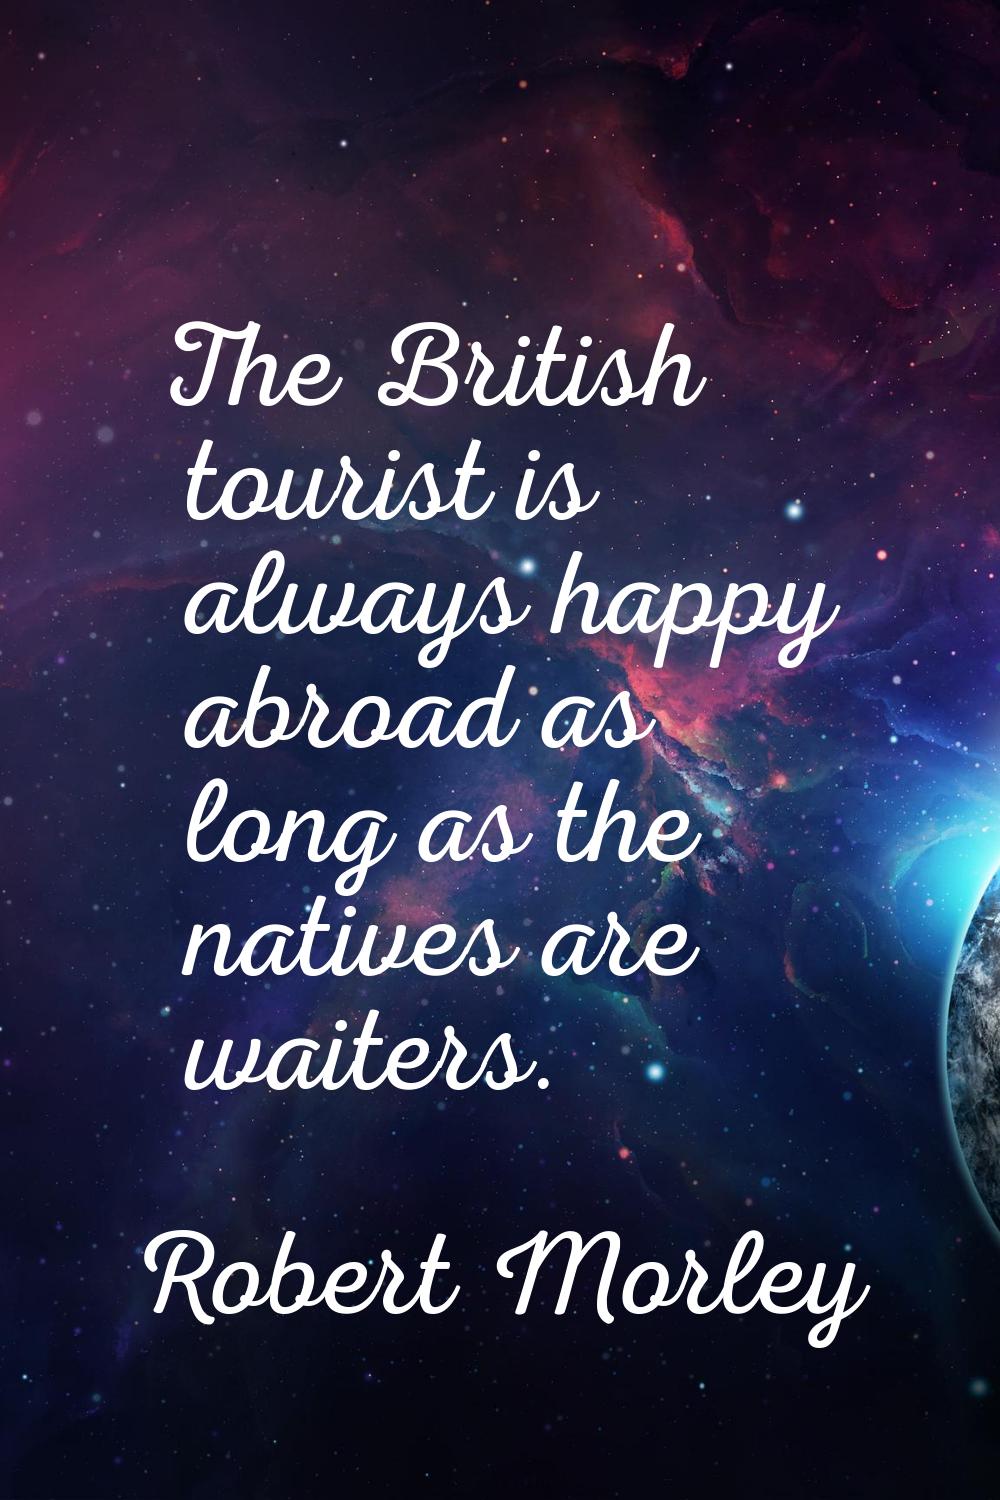 The British tourist is always happy abroad as long as the natives are waiters.